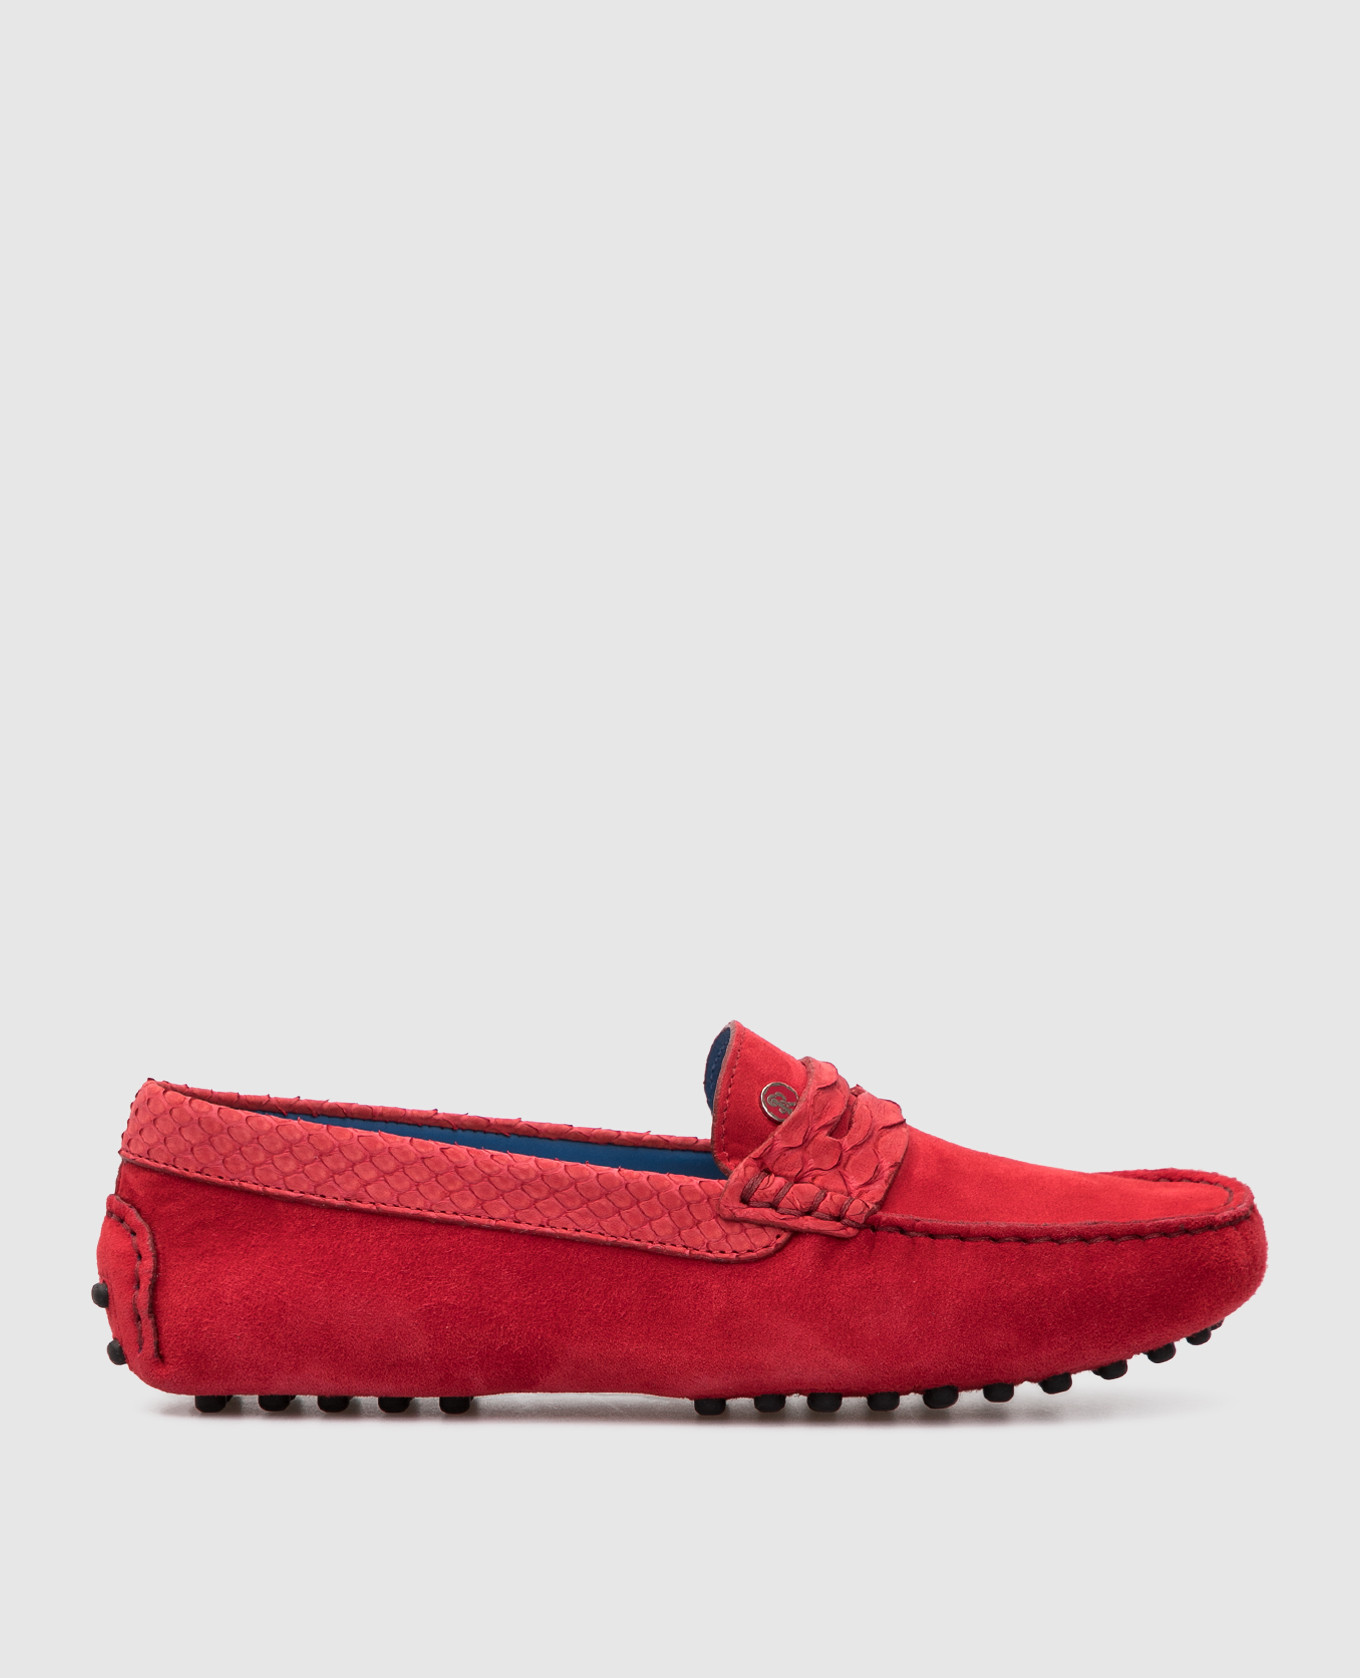 Children's red moccasins in suede and python skin